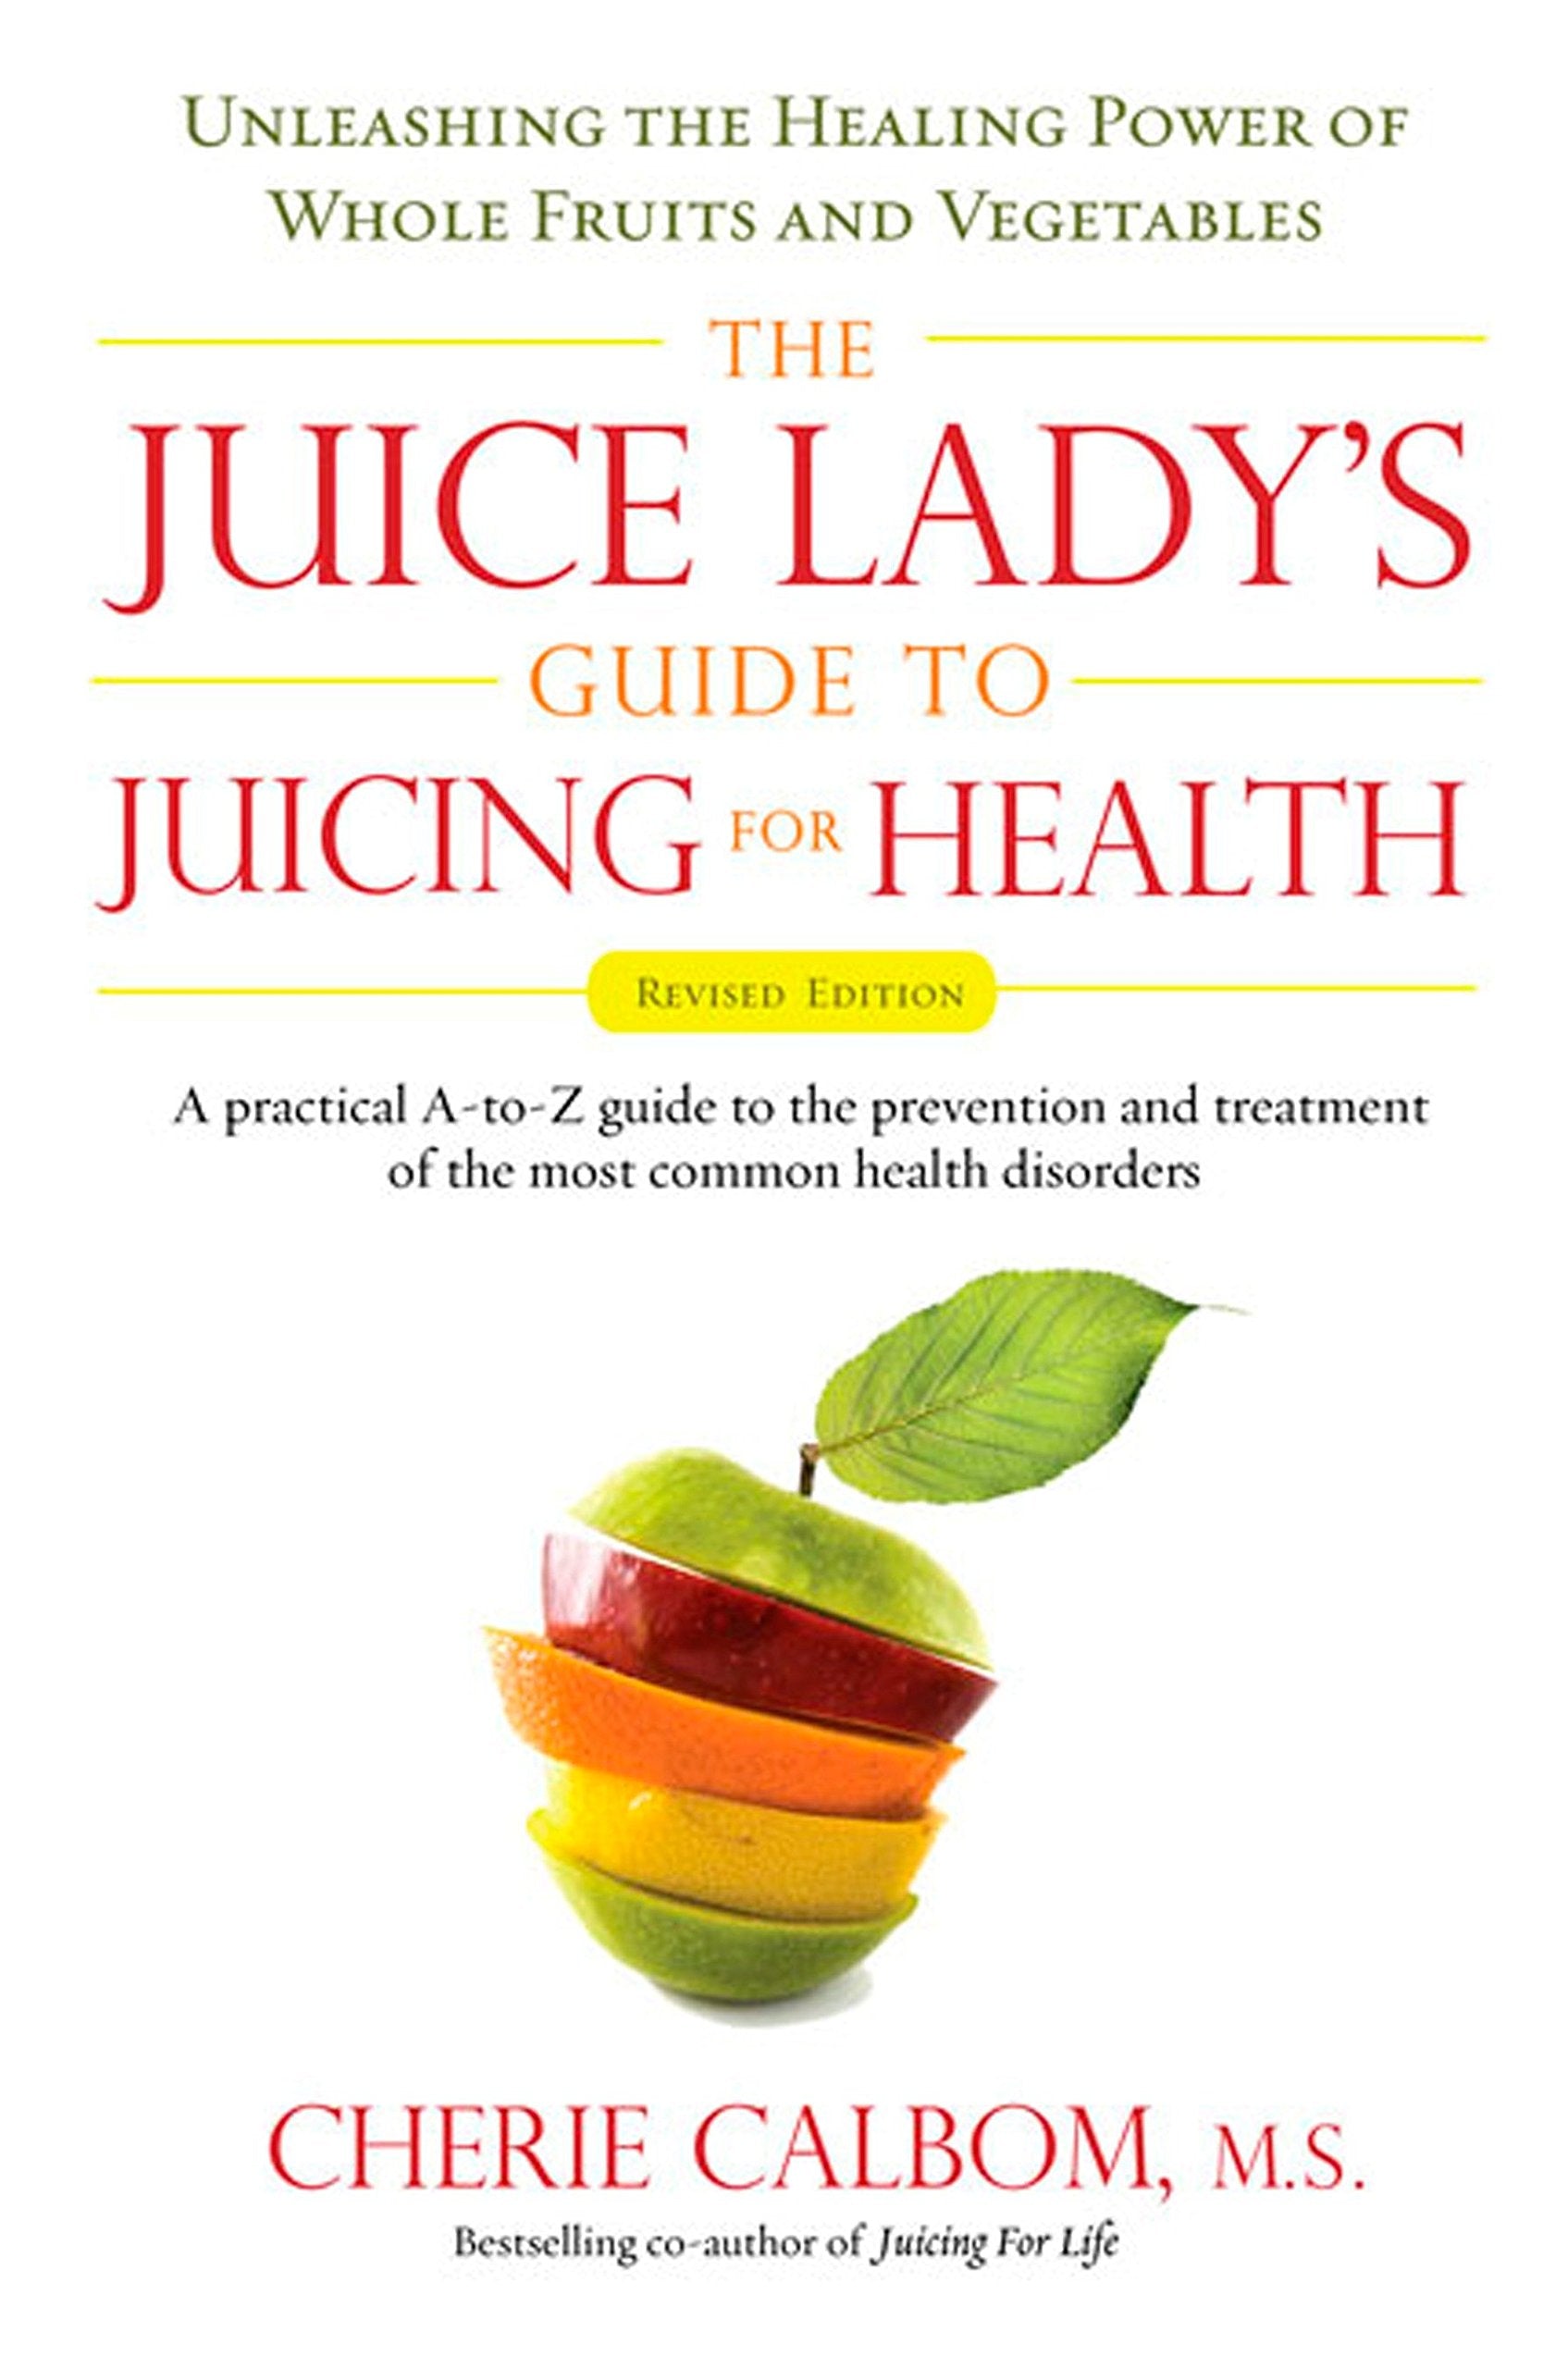 Livre ISBN 1583333177 The Juice Lady's Guide To Juicing for Health: Unleashing the Healing Power of Whole Fruits and Vegetables (Cherie Calbom)